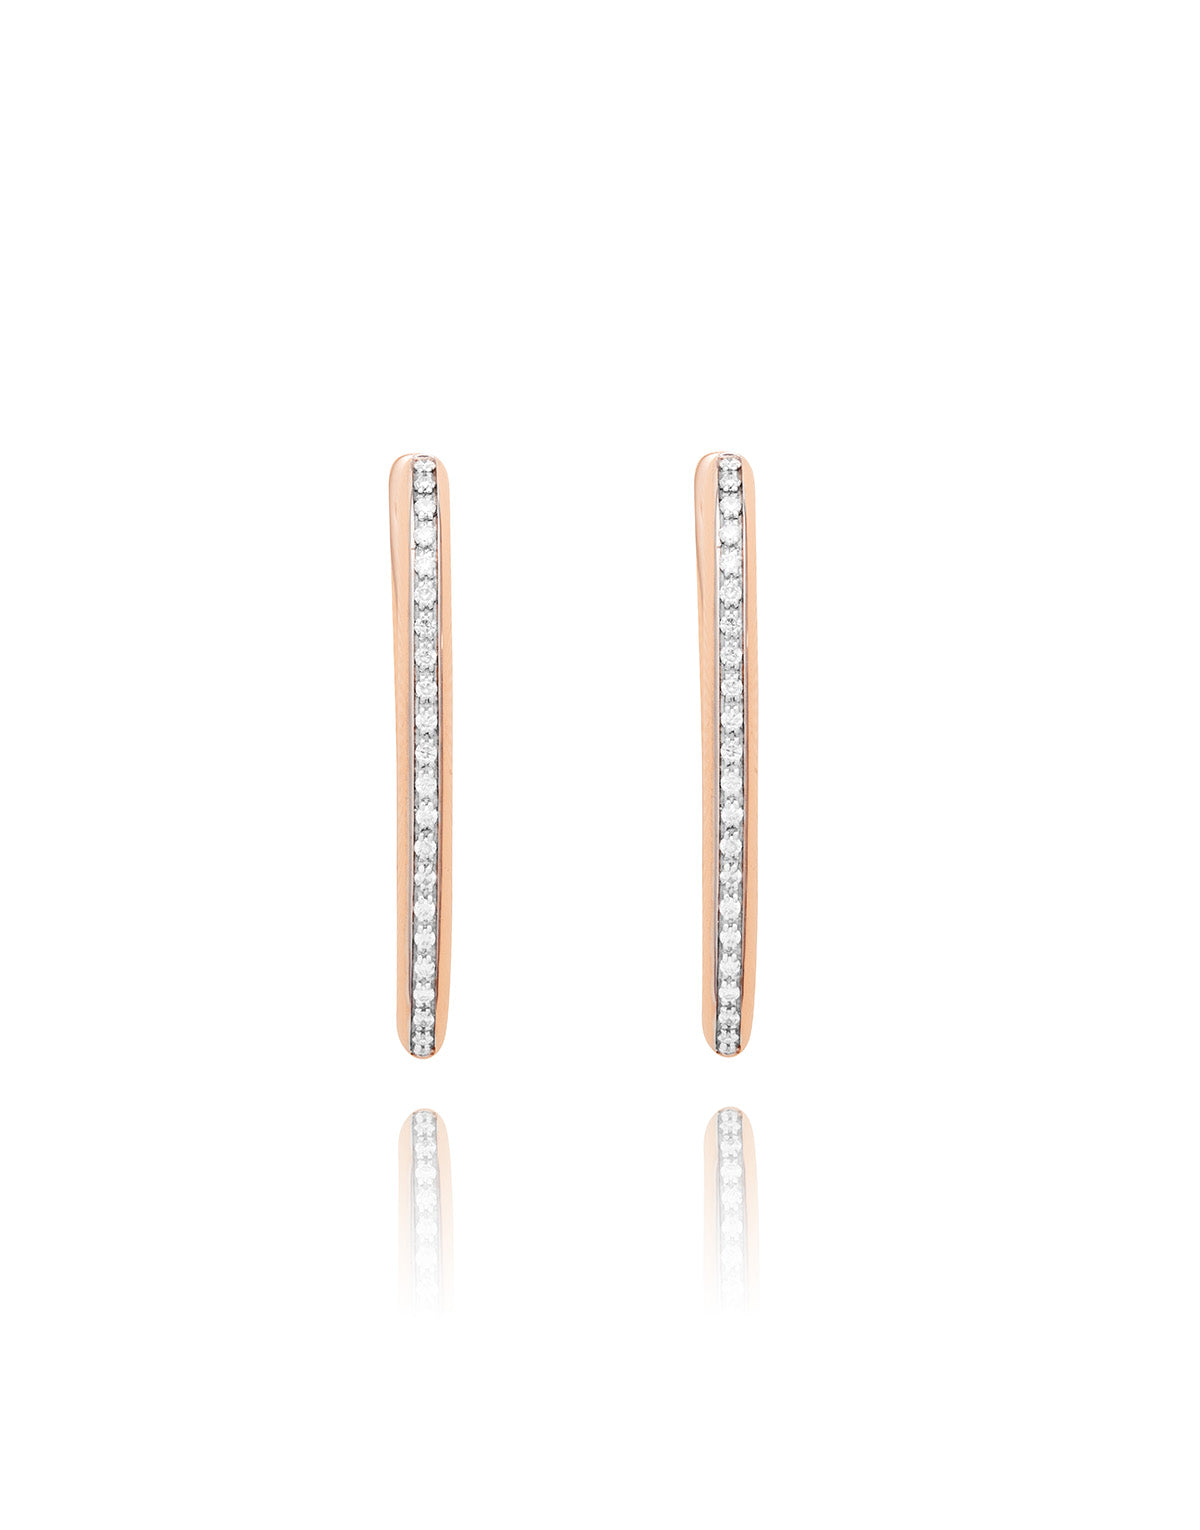 "Libera icon" small rose gold oval hoop earrings with diamonds